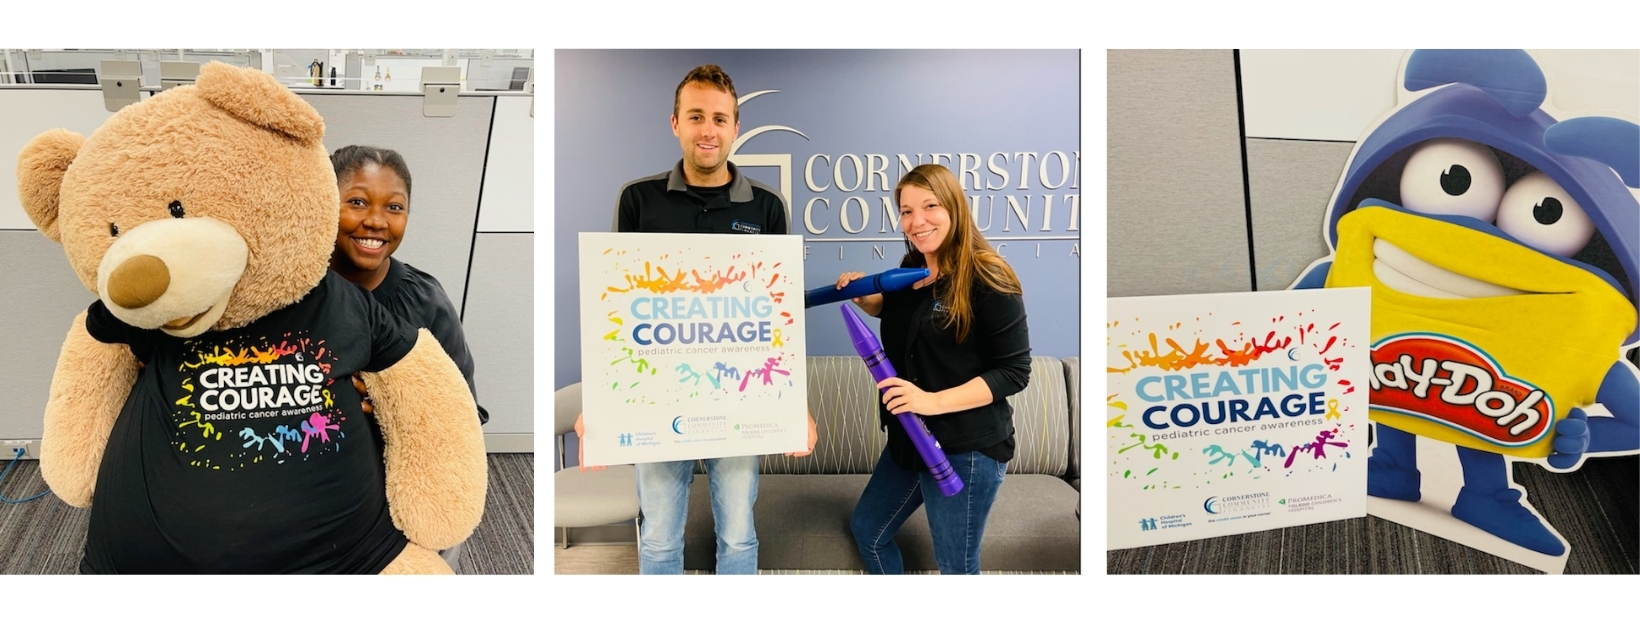 creating courage banner